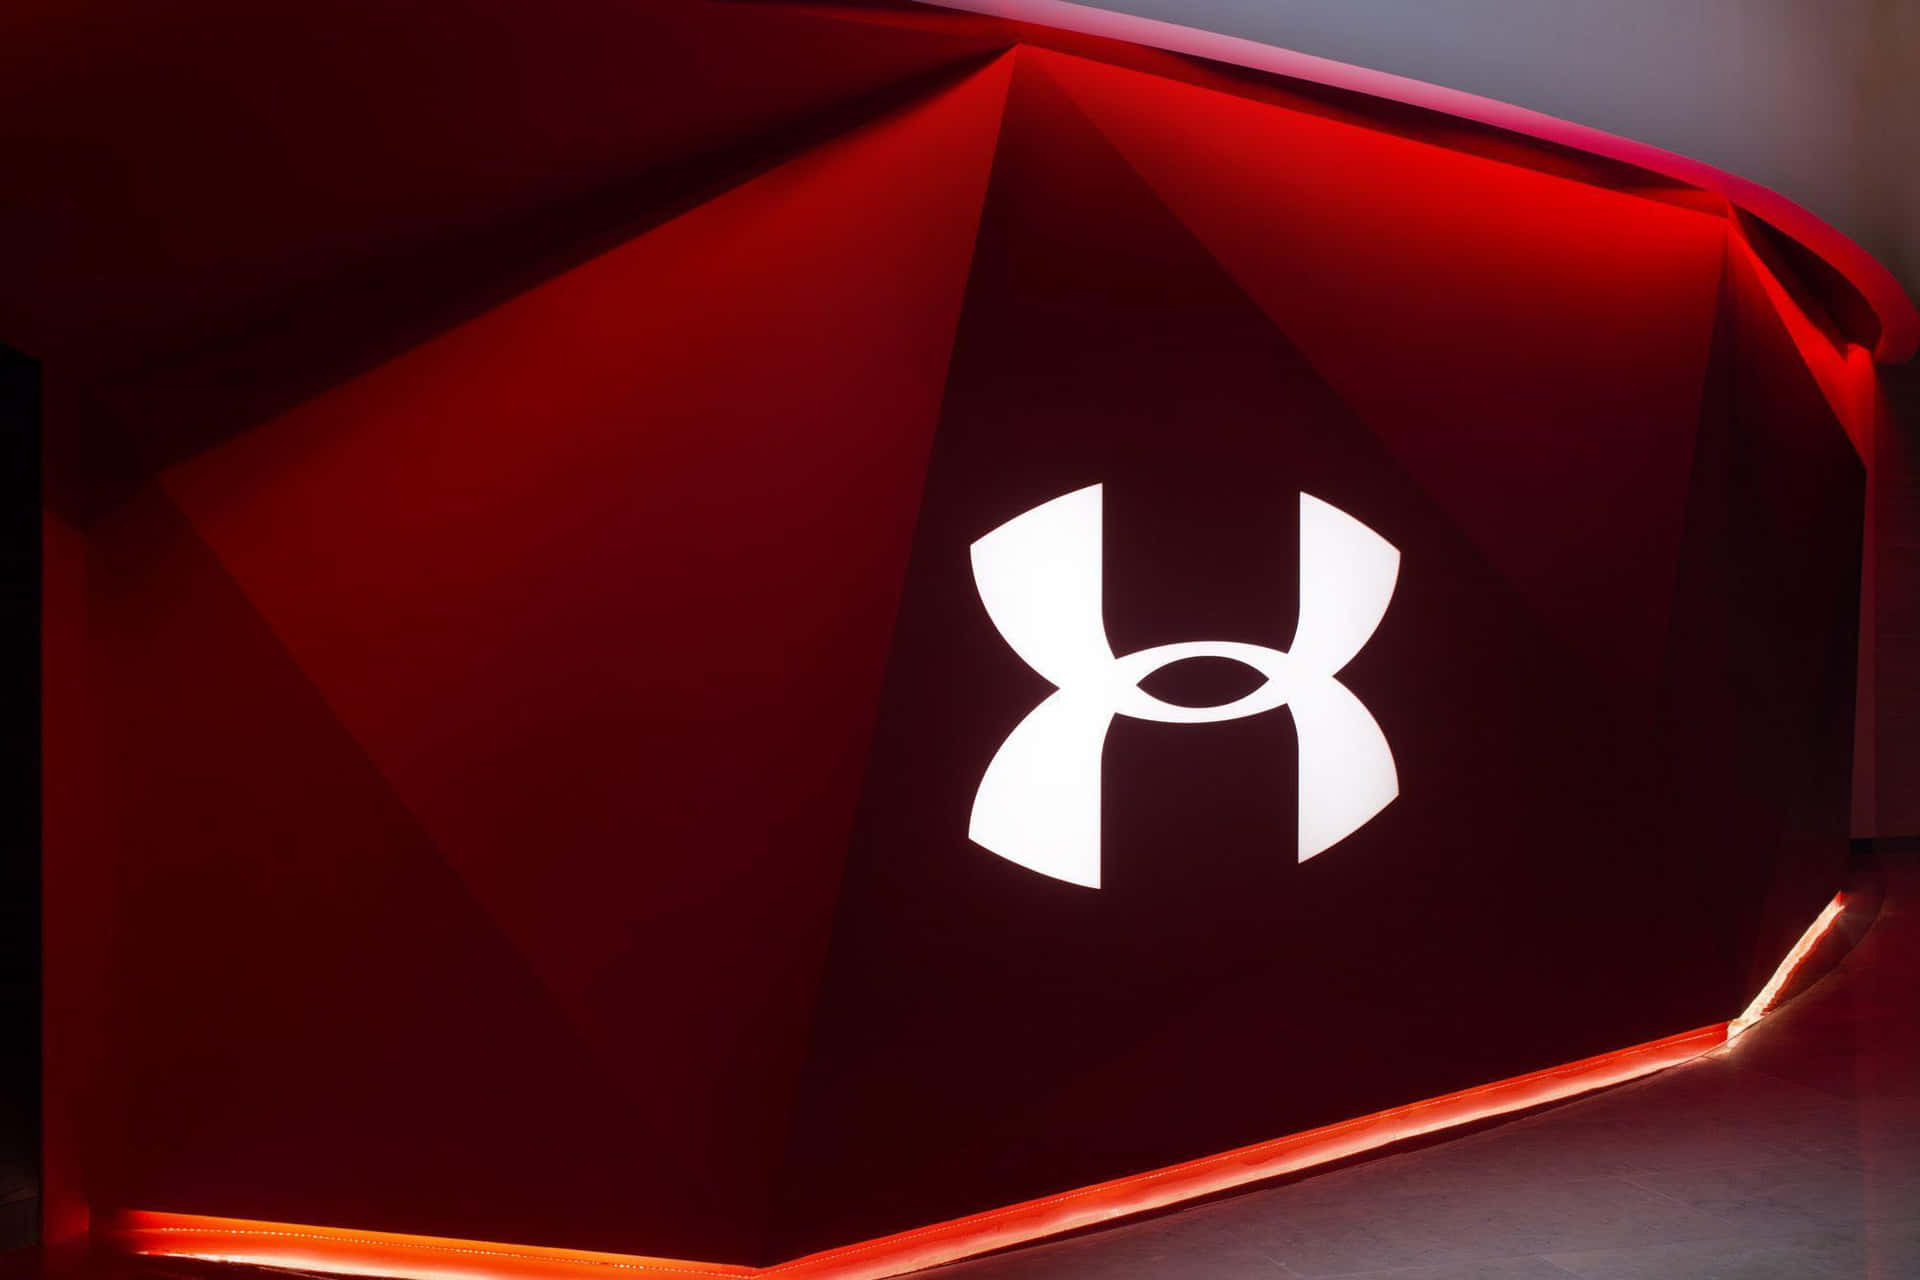 "Stay Active, Stay Driven with Under Armour"